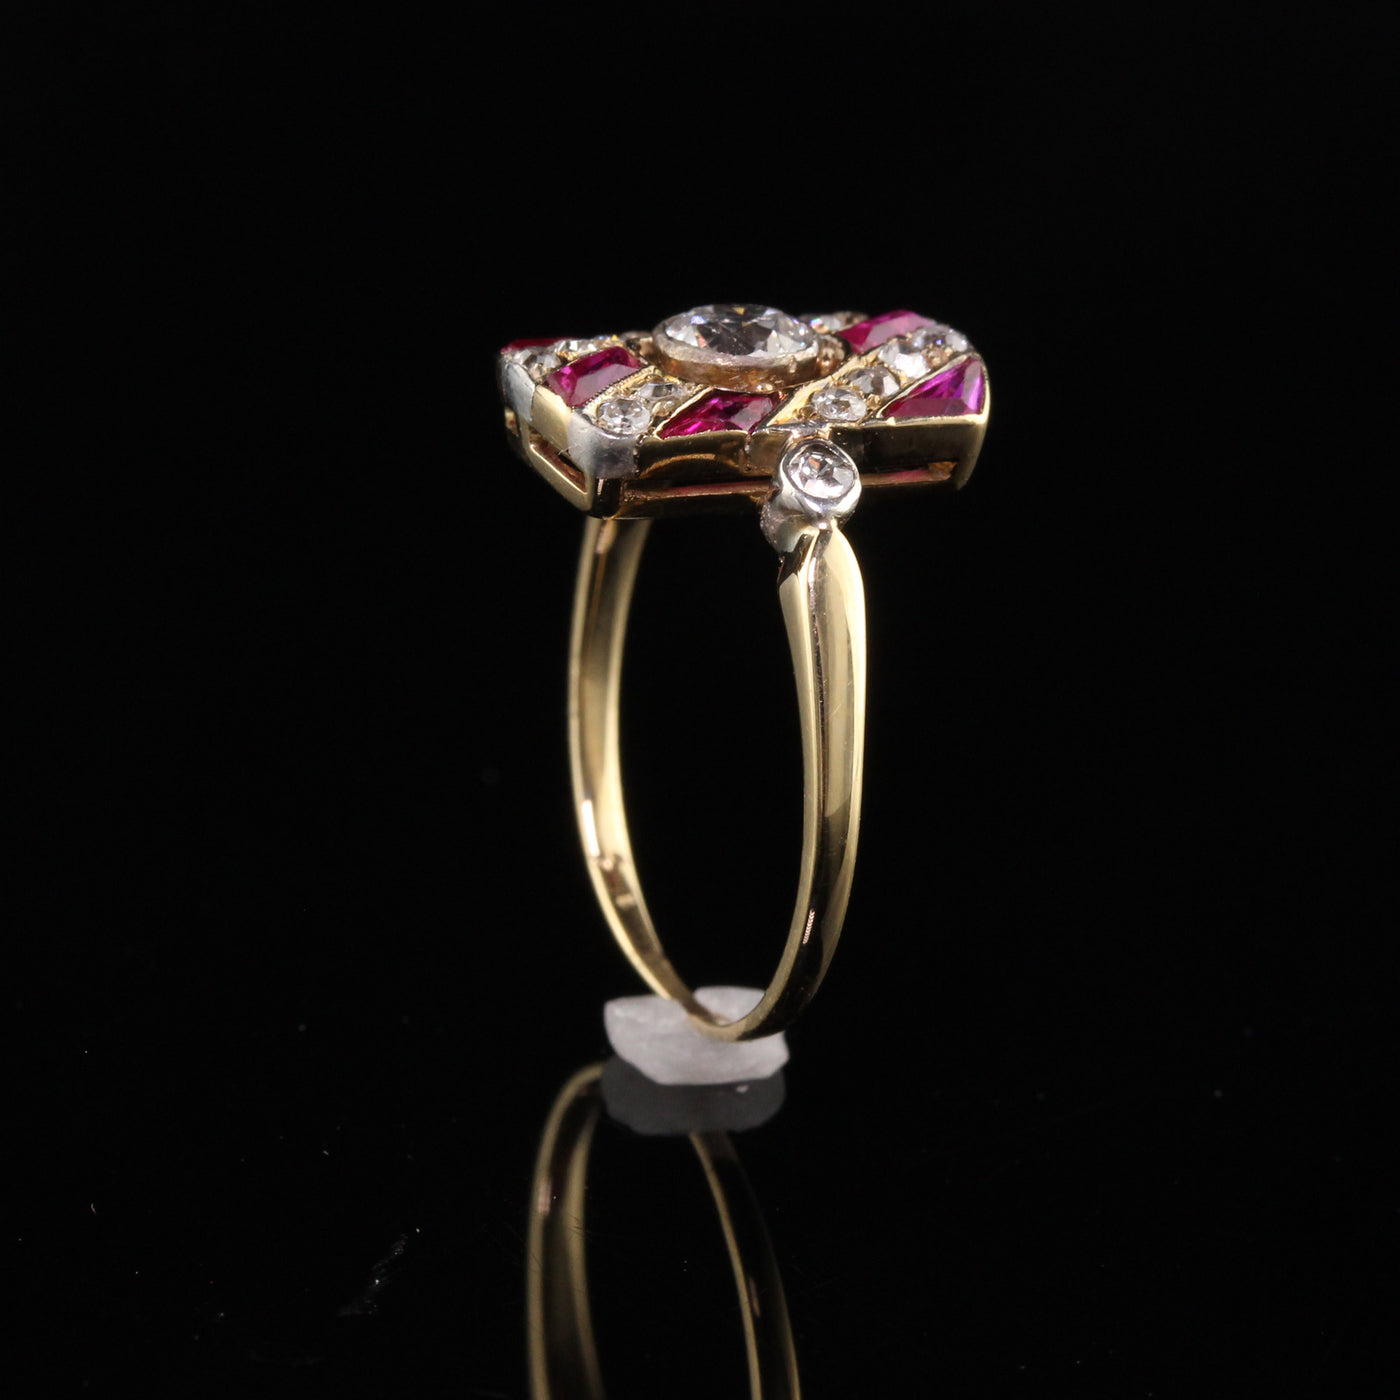 Antique Edwardian 14K Yellow Gold Old Mine Diamond and Ruby Ring